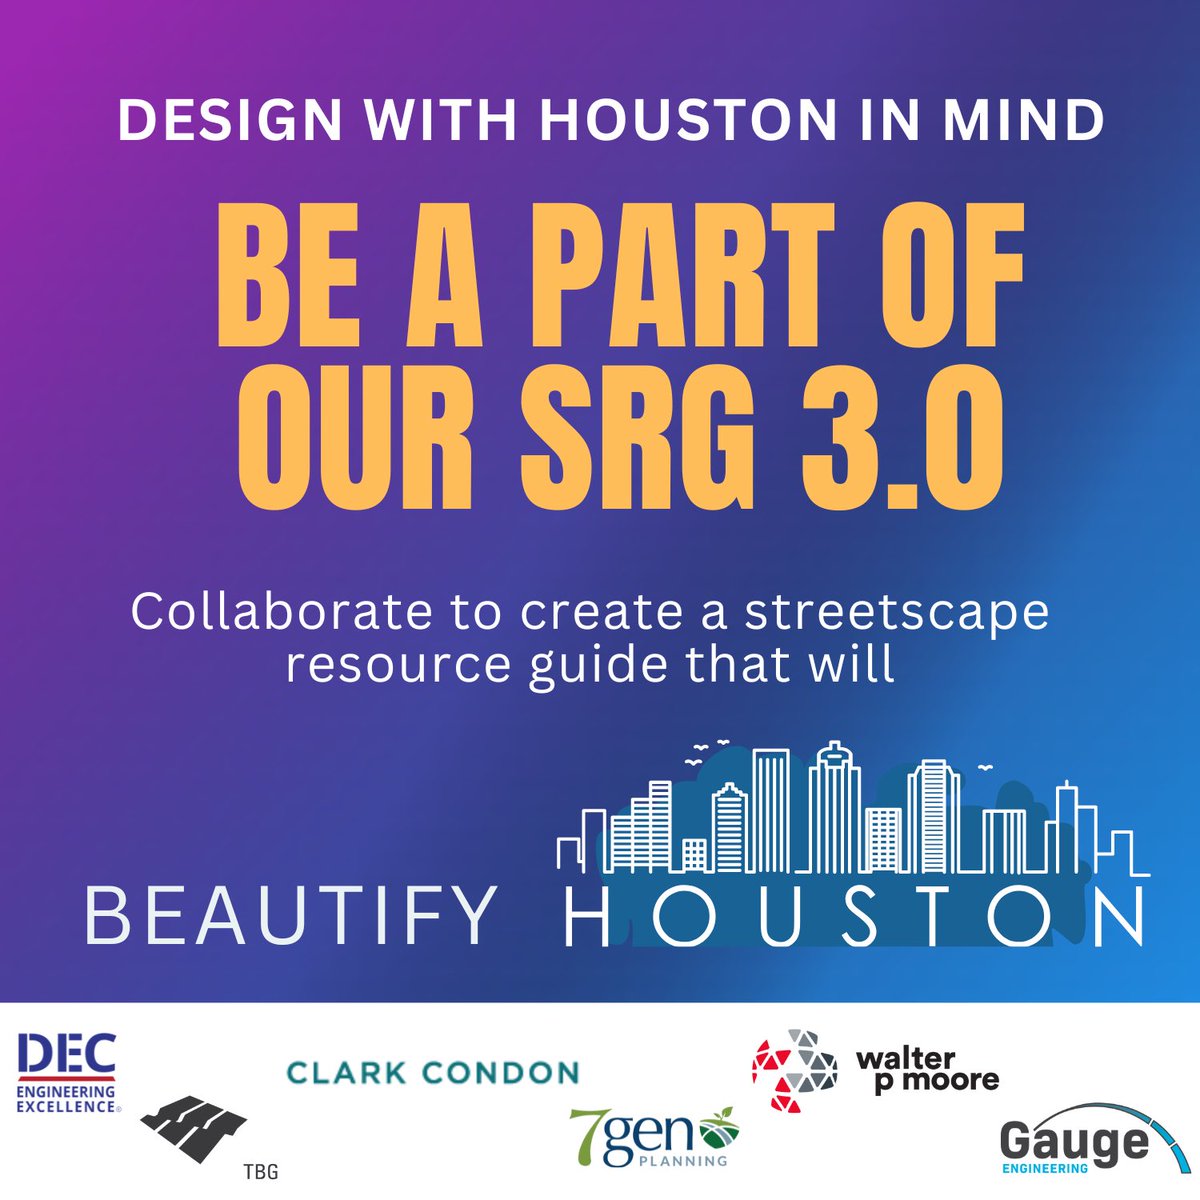 Help beautify Houston! Collaborate to help create the Scenic Houston SRG 3.0. #myscenichouston #streetscaperesourceguide #SRG #streetscapes #houstondesign